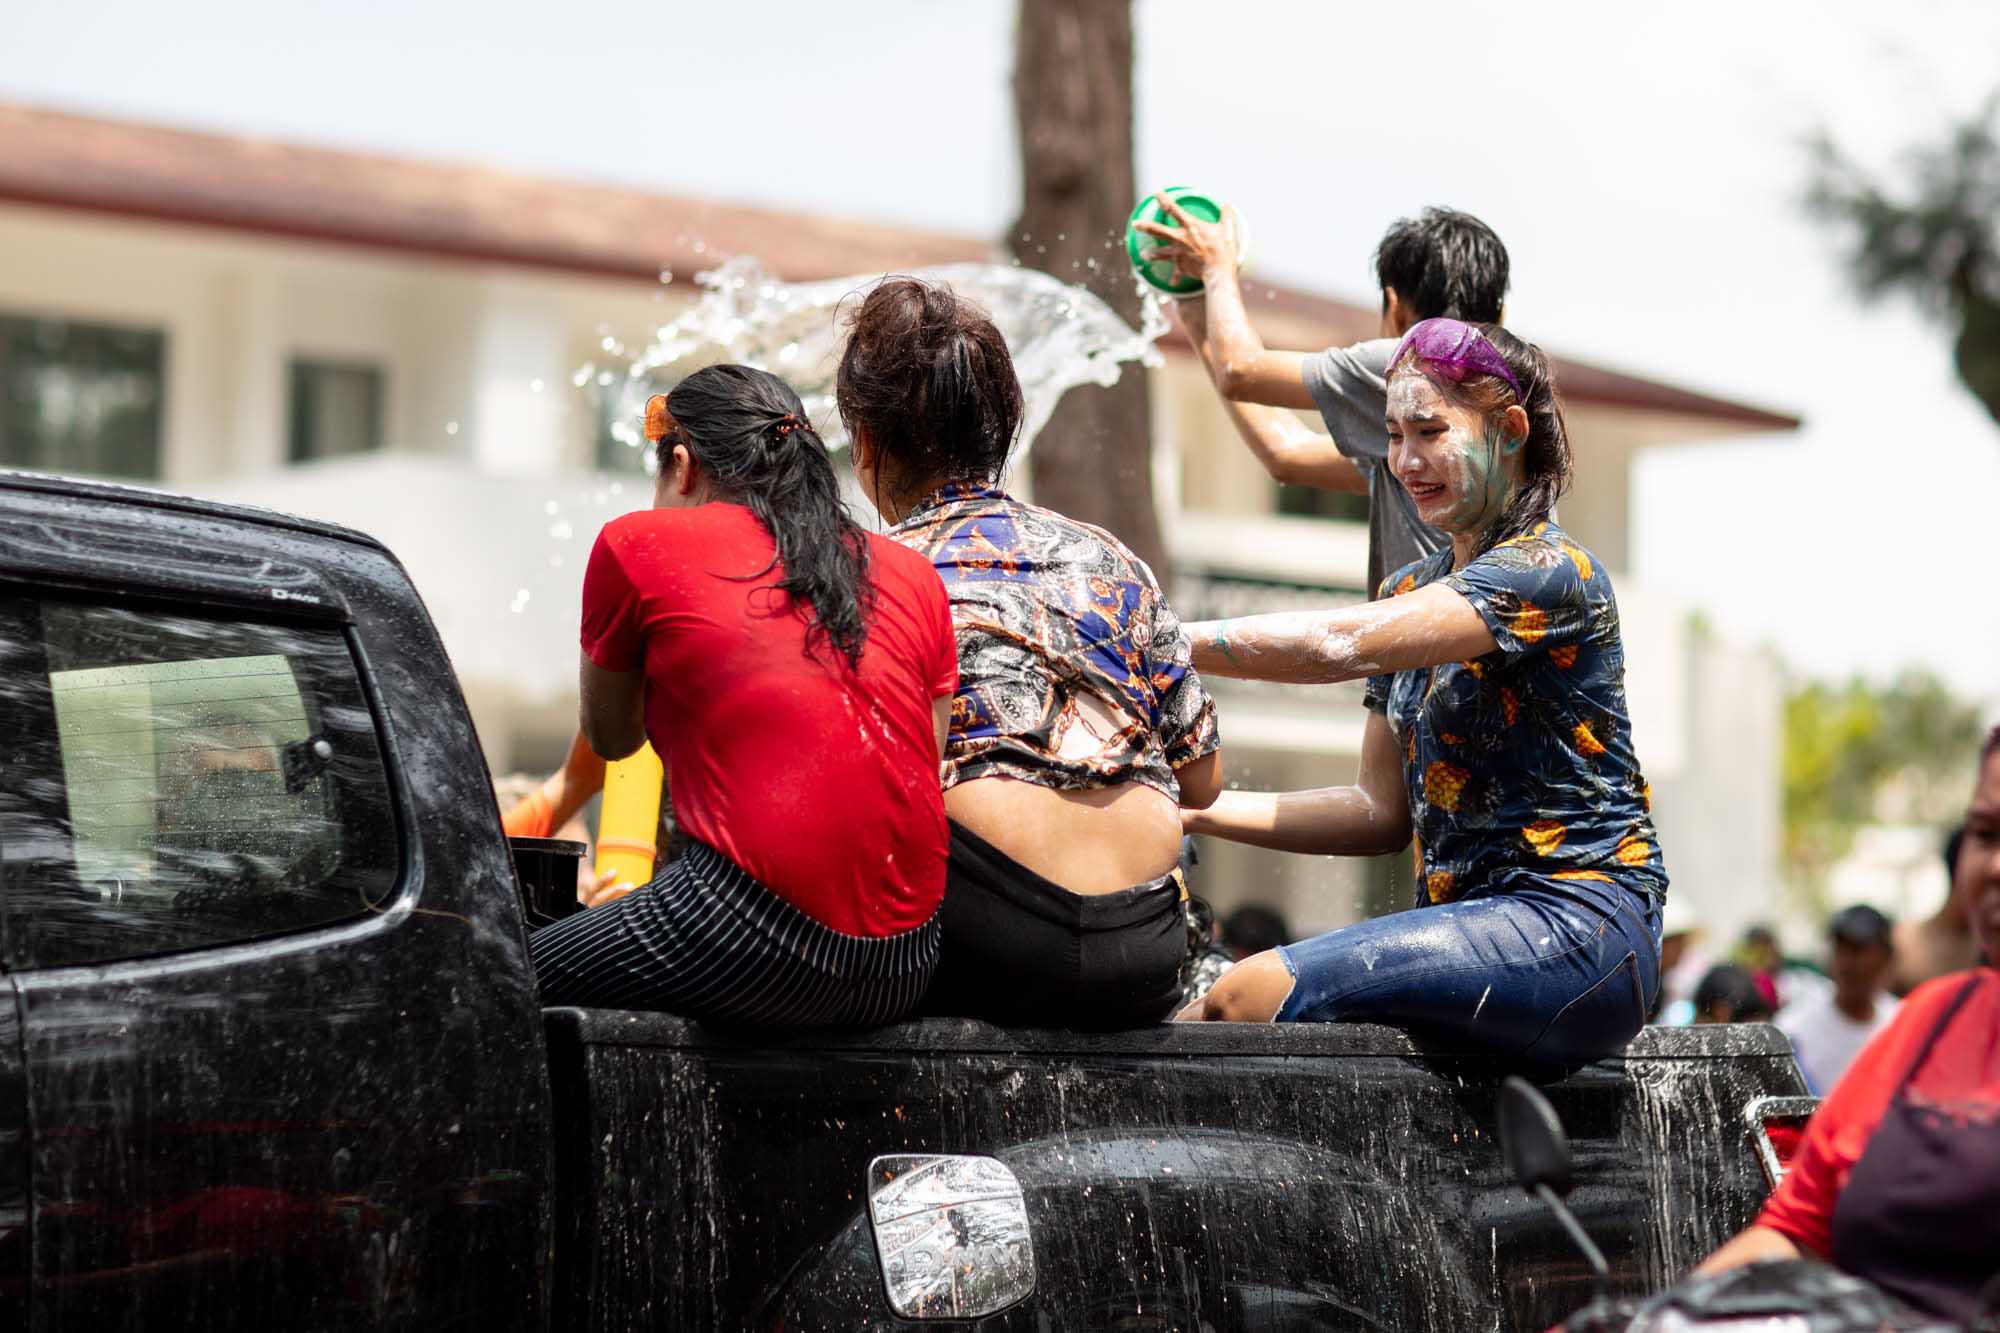 Women covered in paint during Songkran water festival in Phuket, Thailand